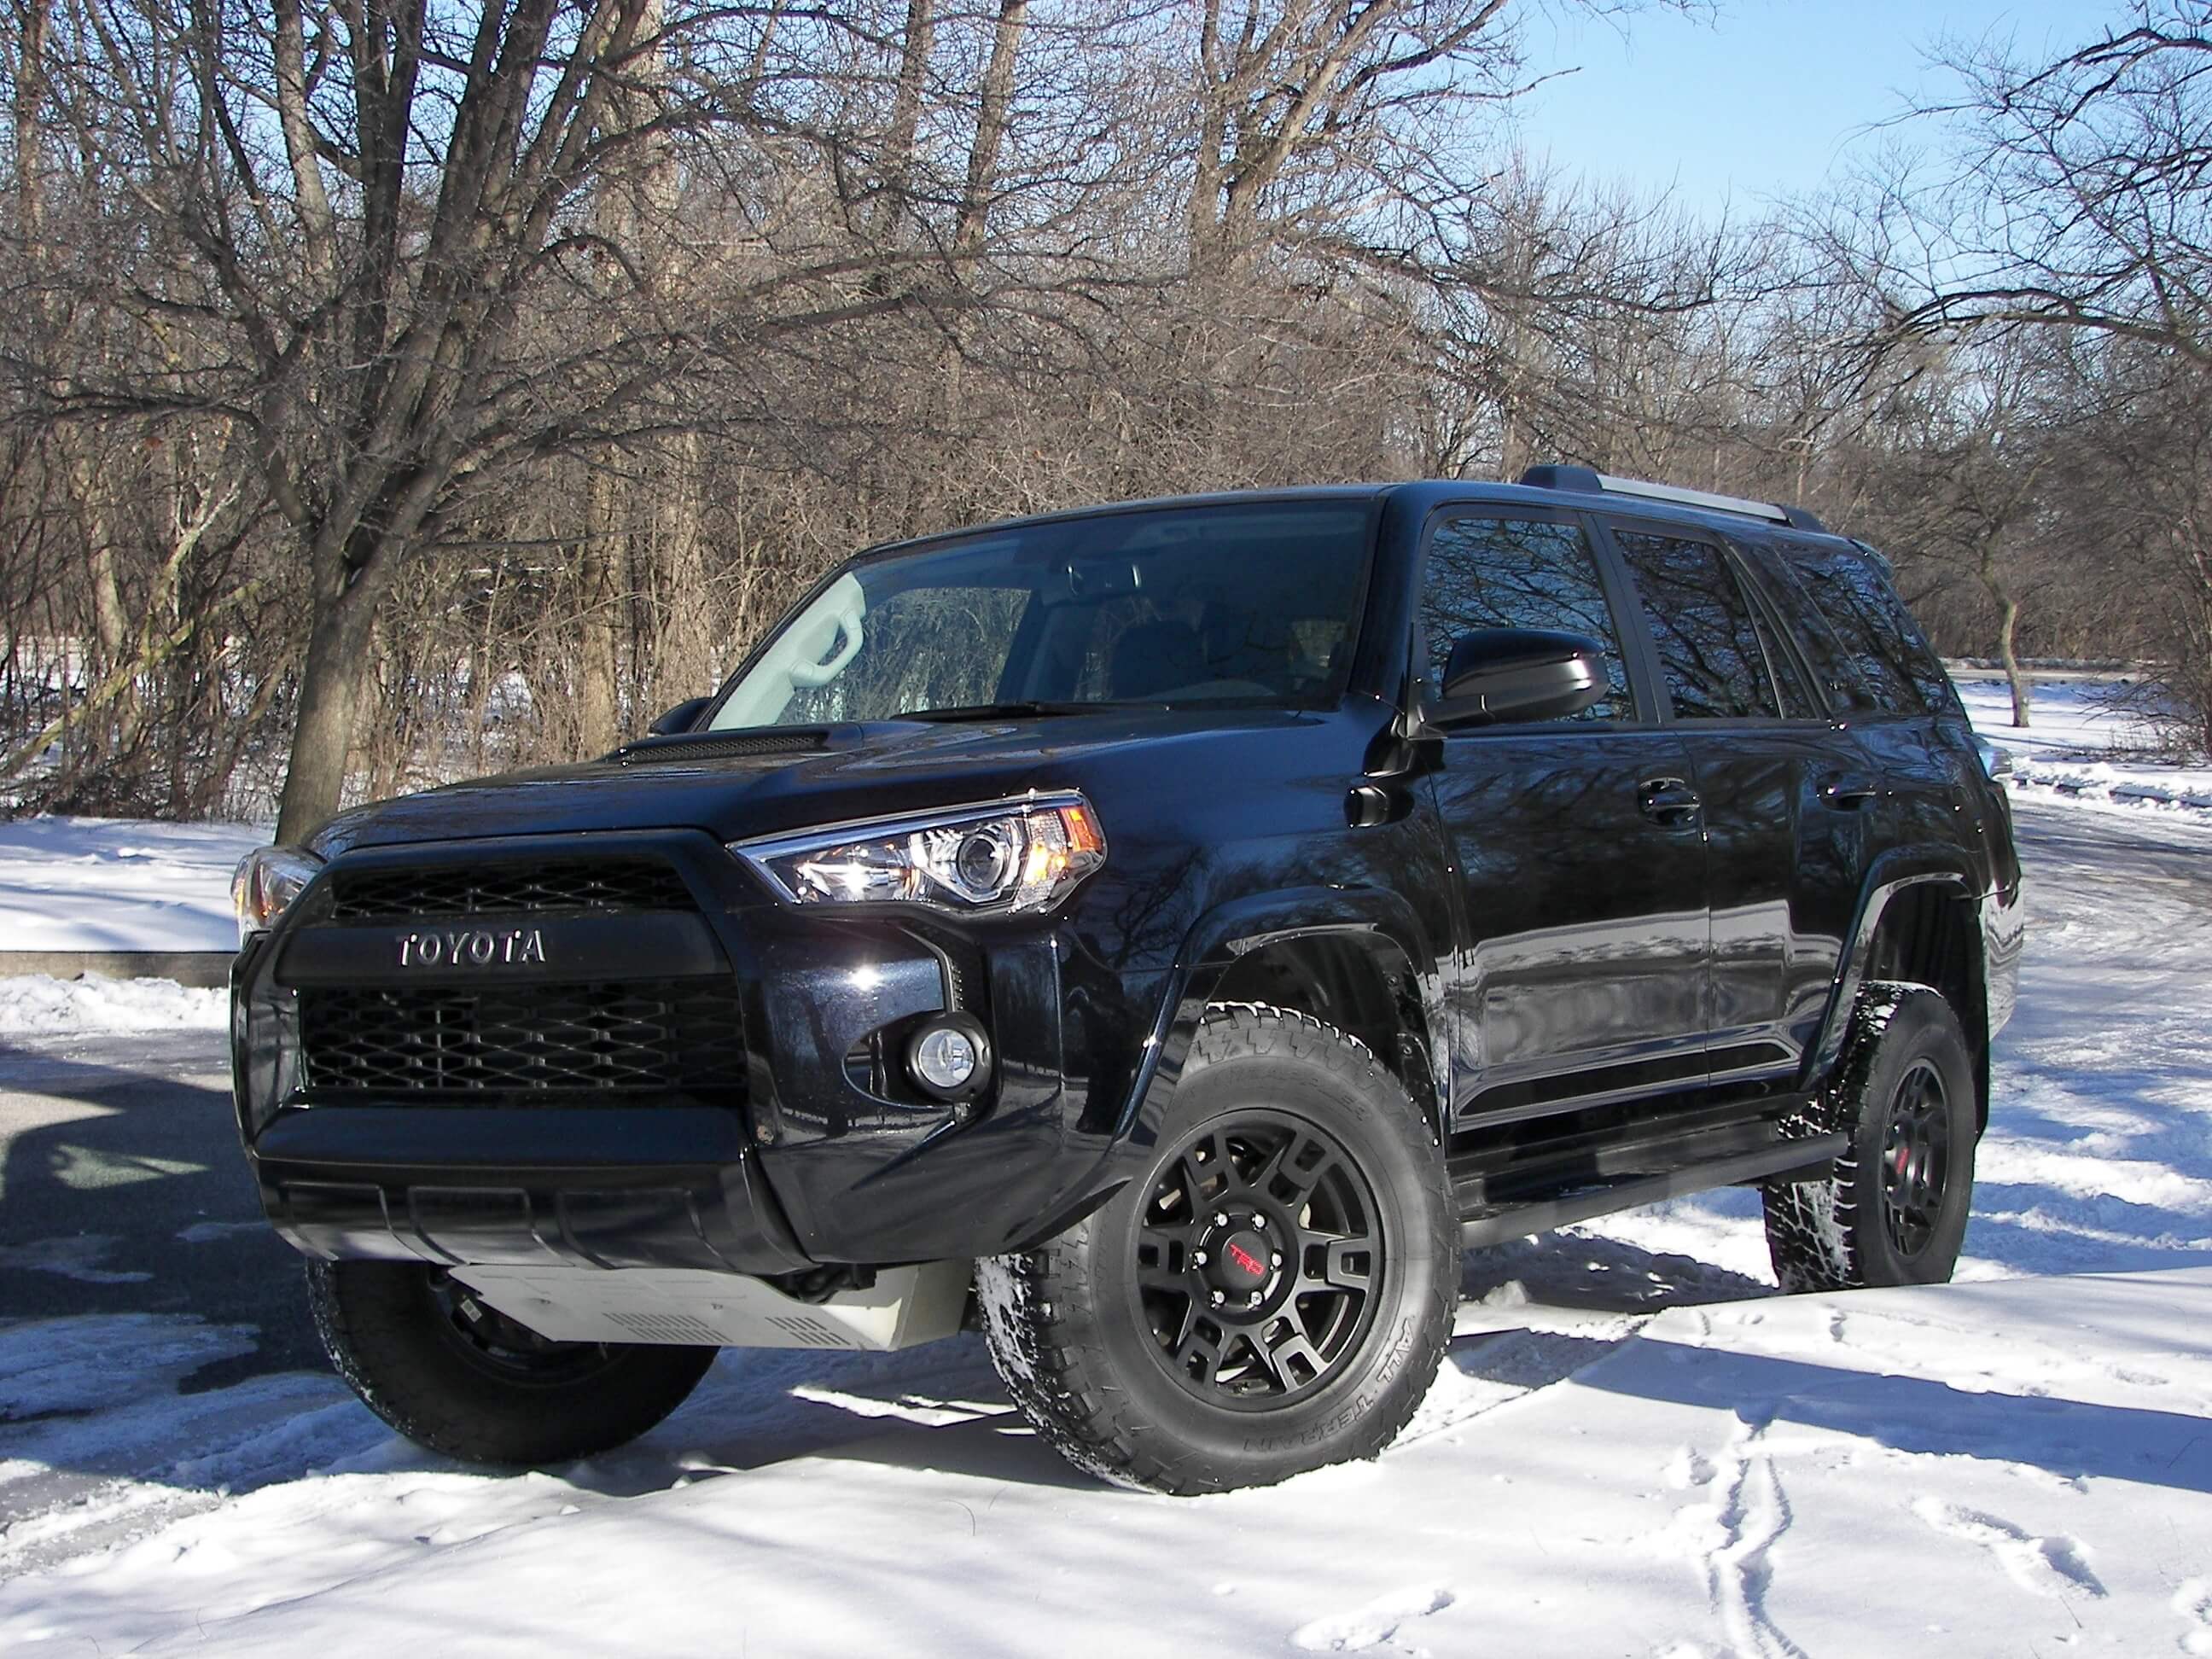 2017 Toyota 4Runner TRD Pro: About the most "Go Anywhere" SUV on the market